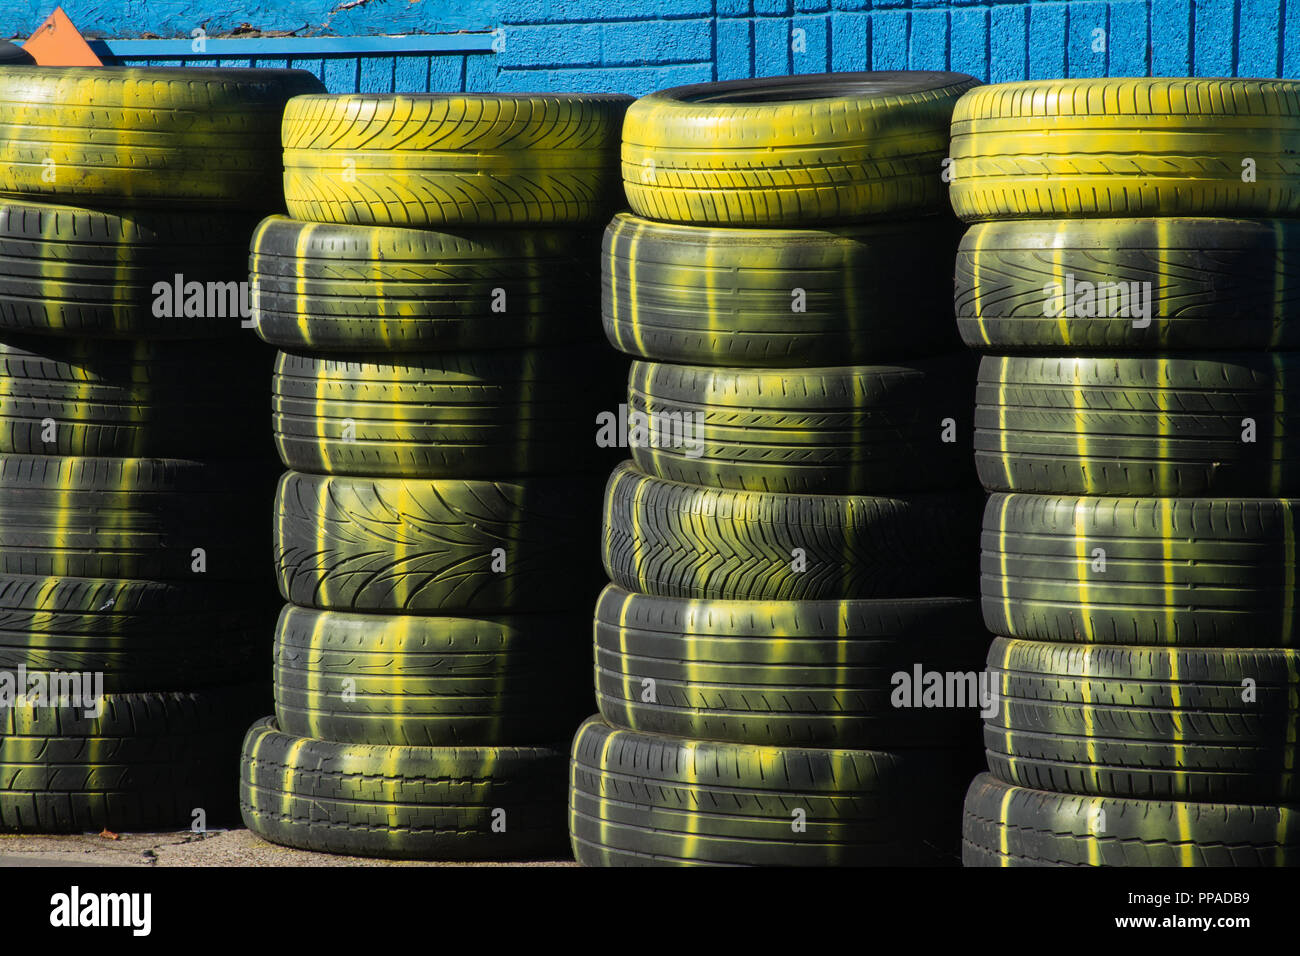 Stacks of old car tyres (tires) with yellow paint on outside a tyre centre Stock Photo